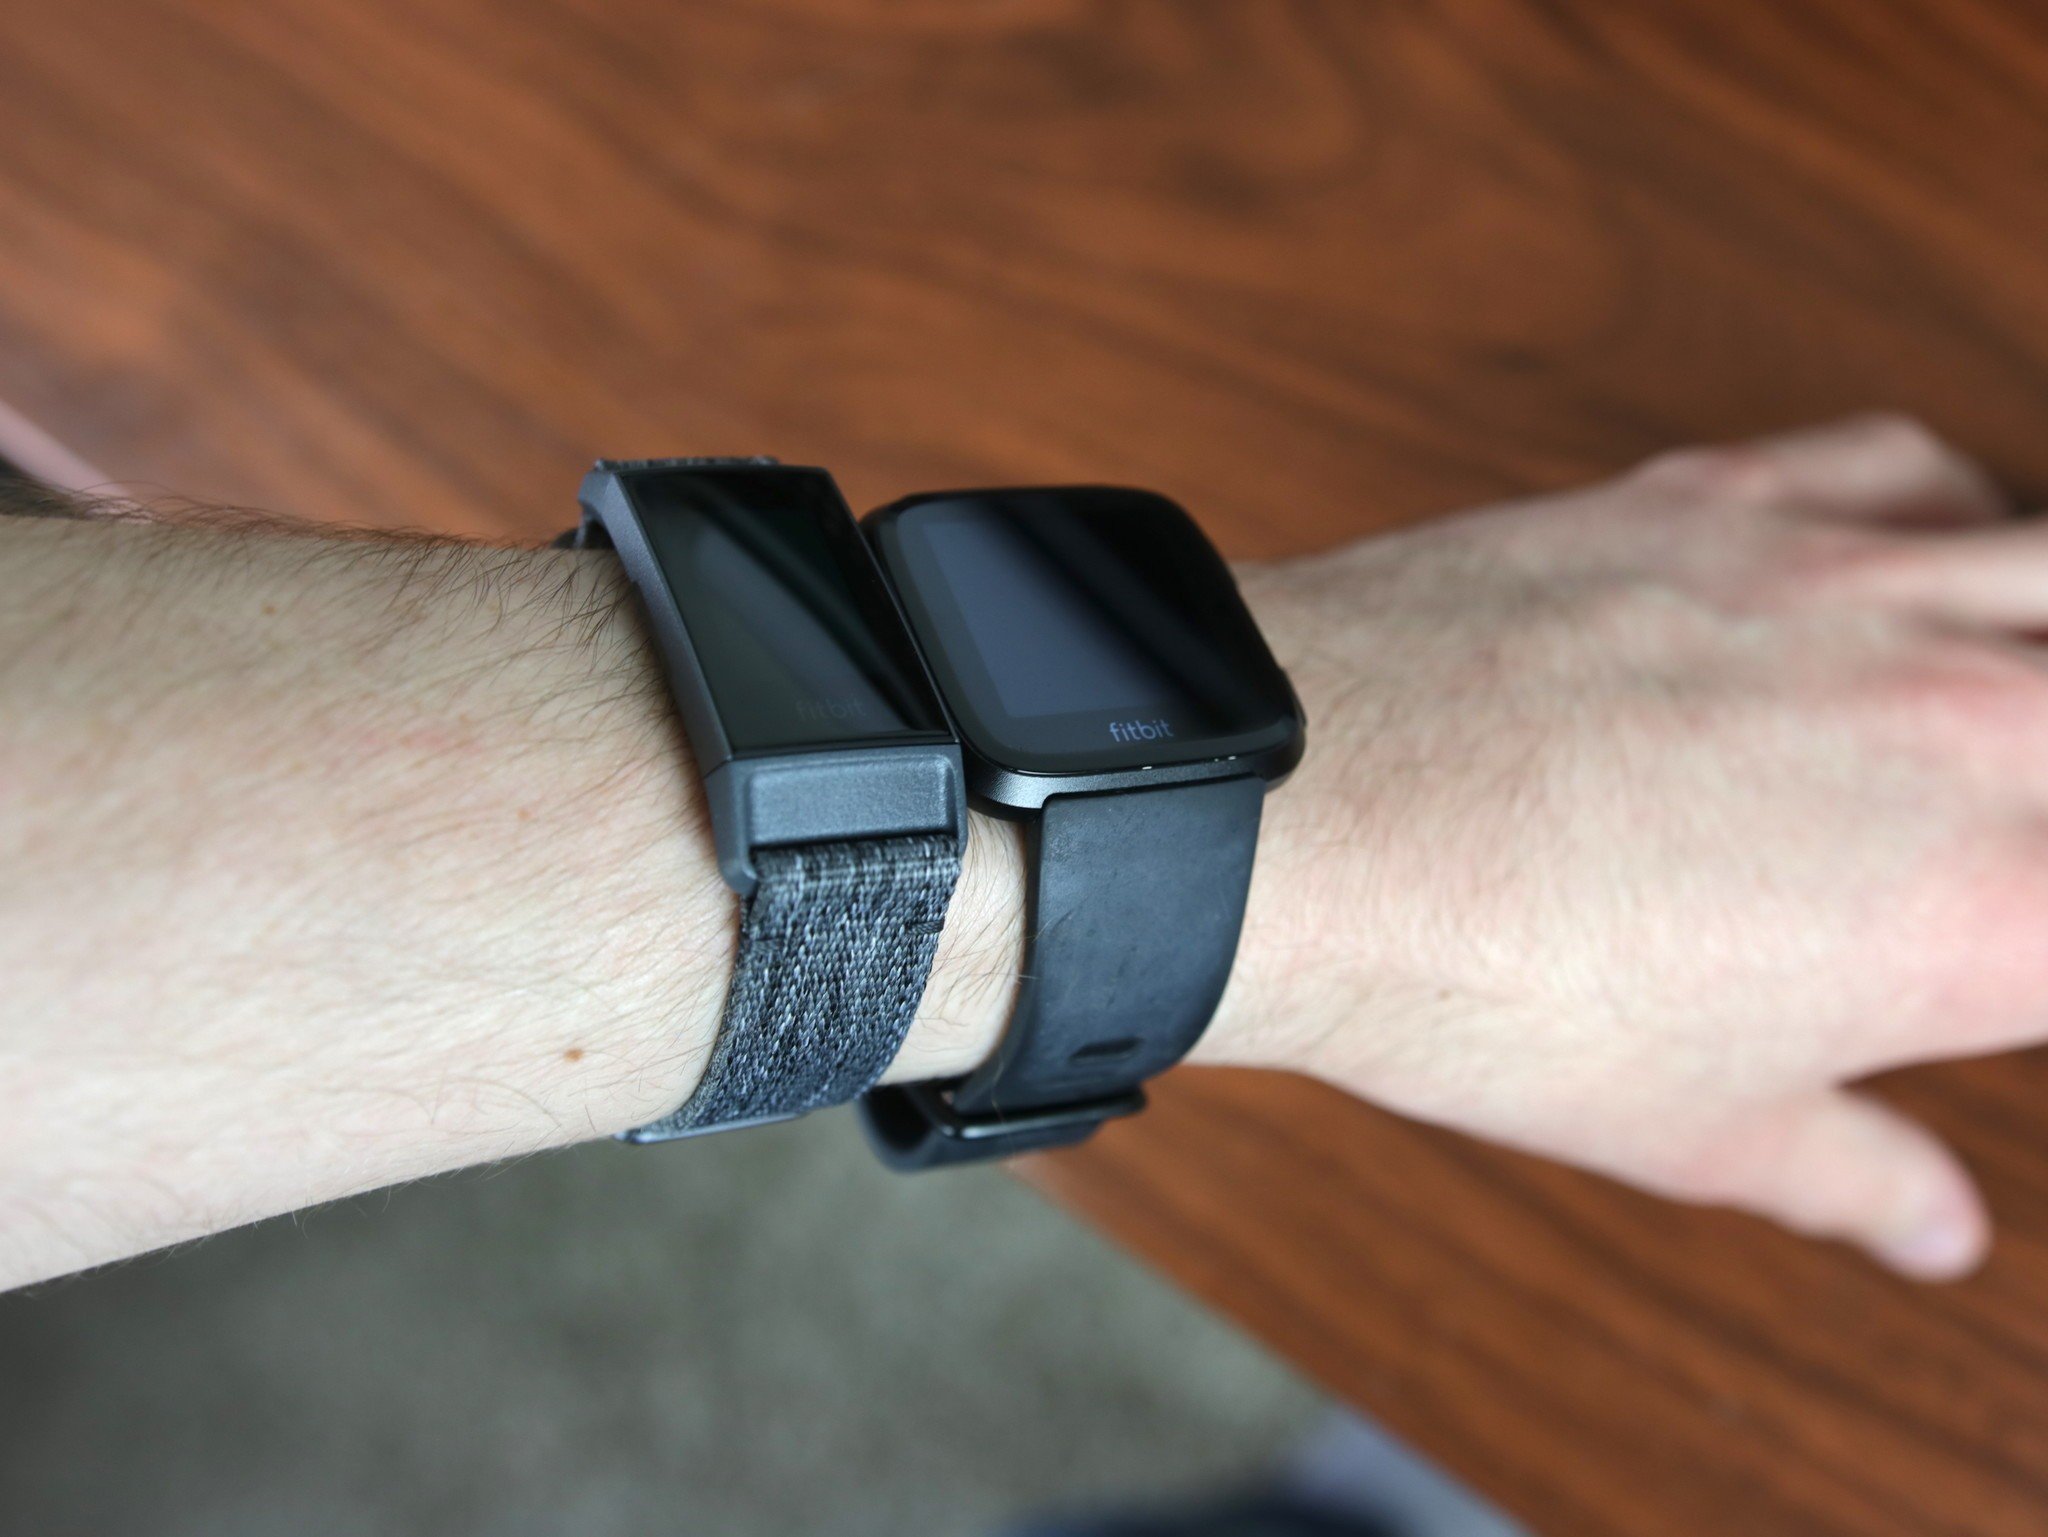 fitbit versa charge 3